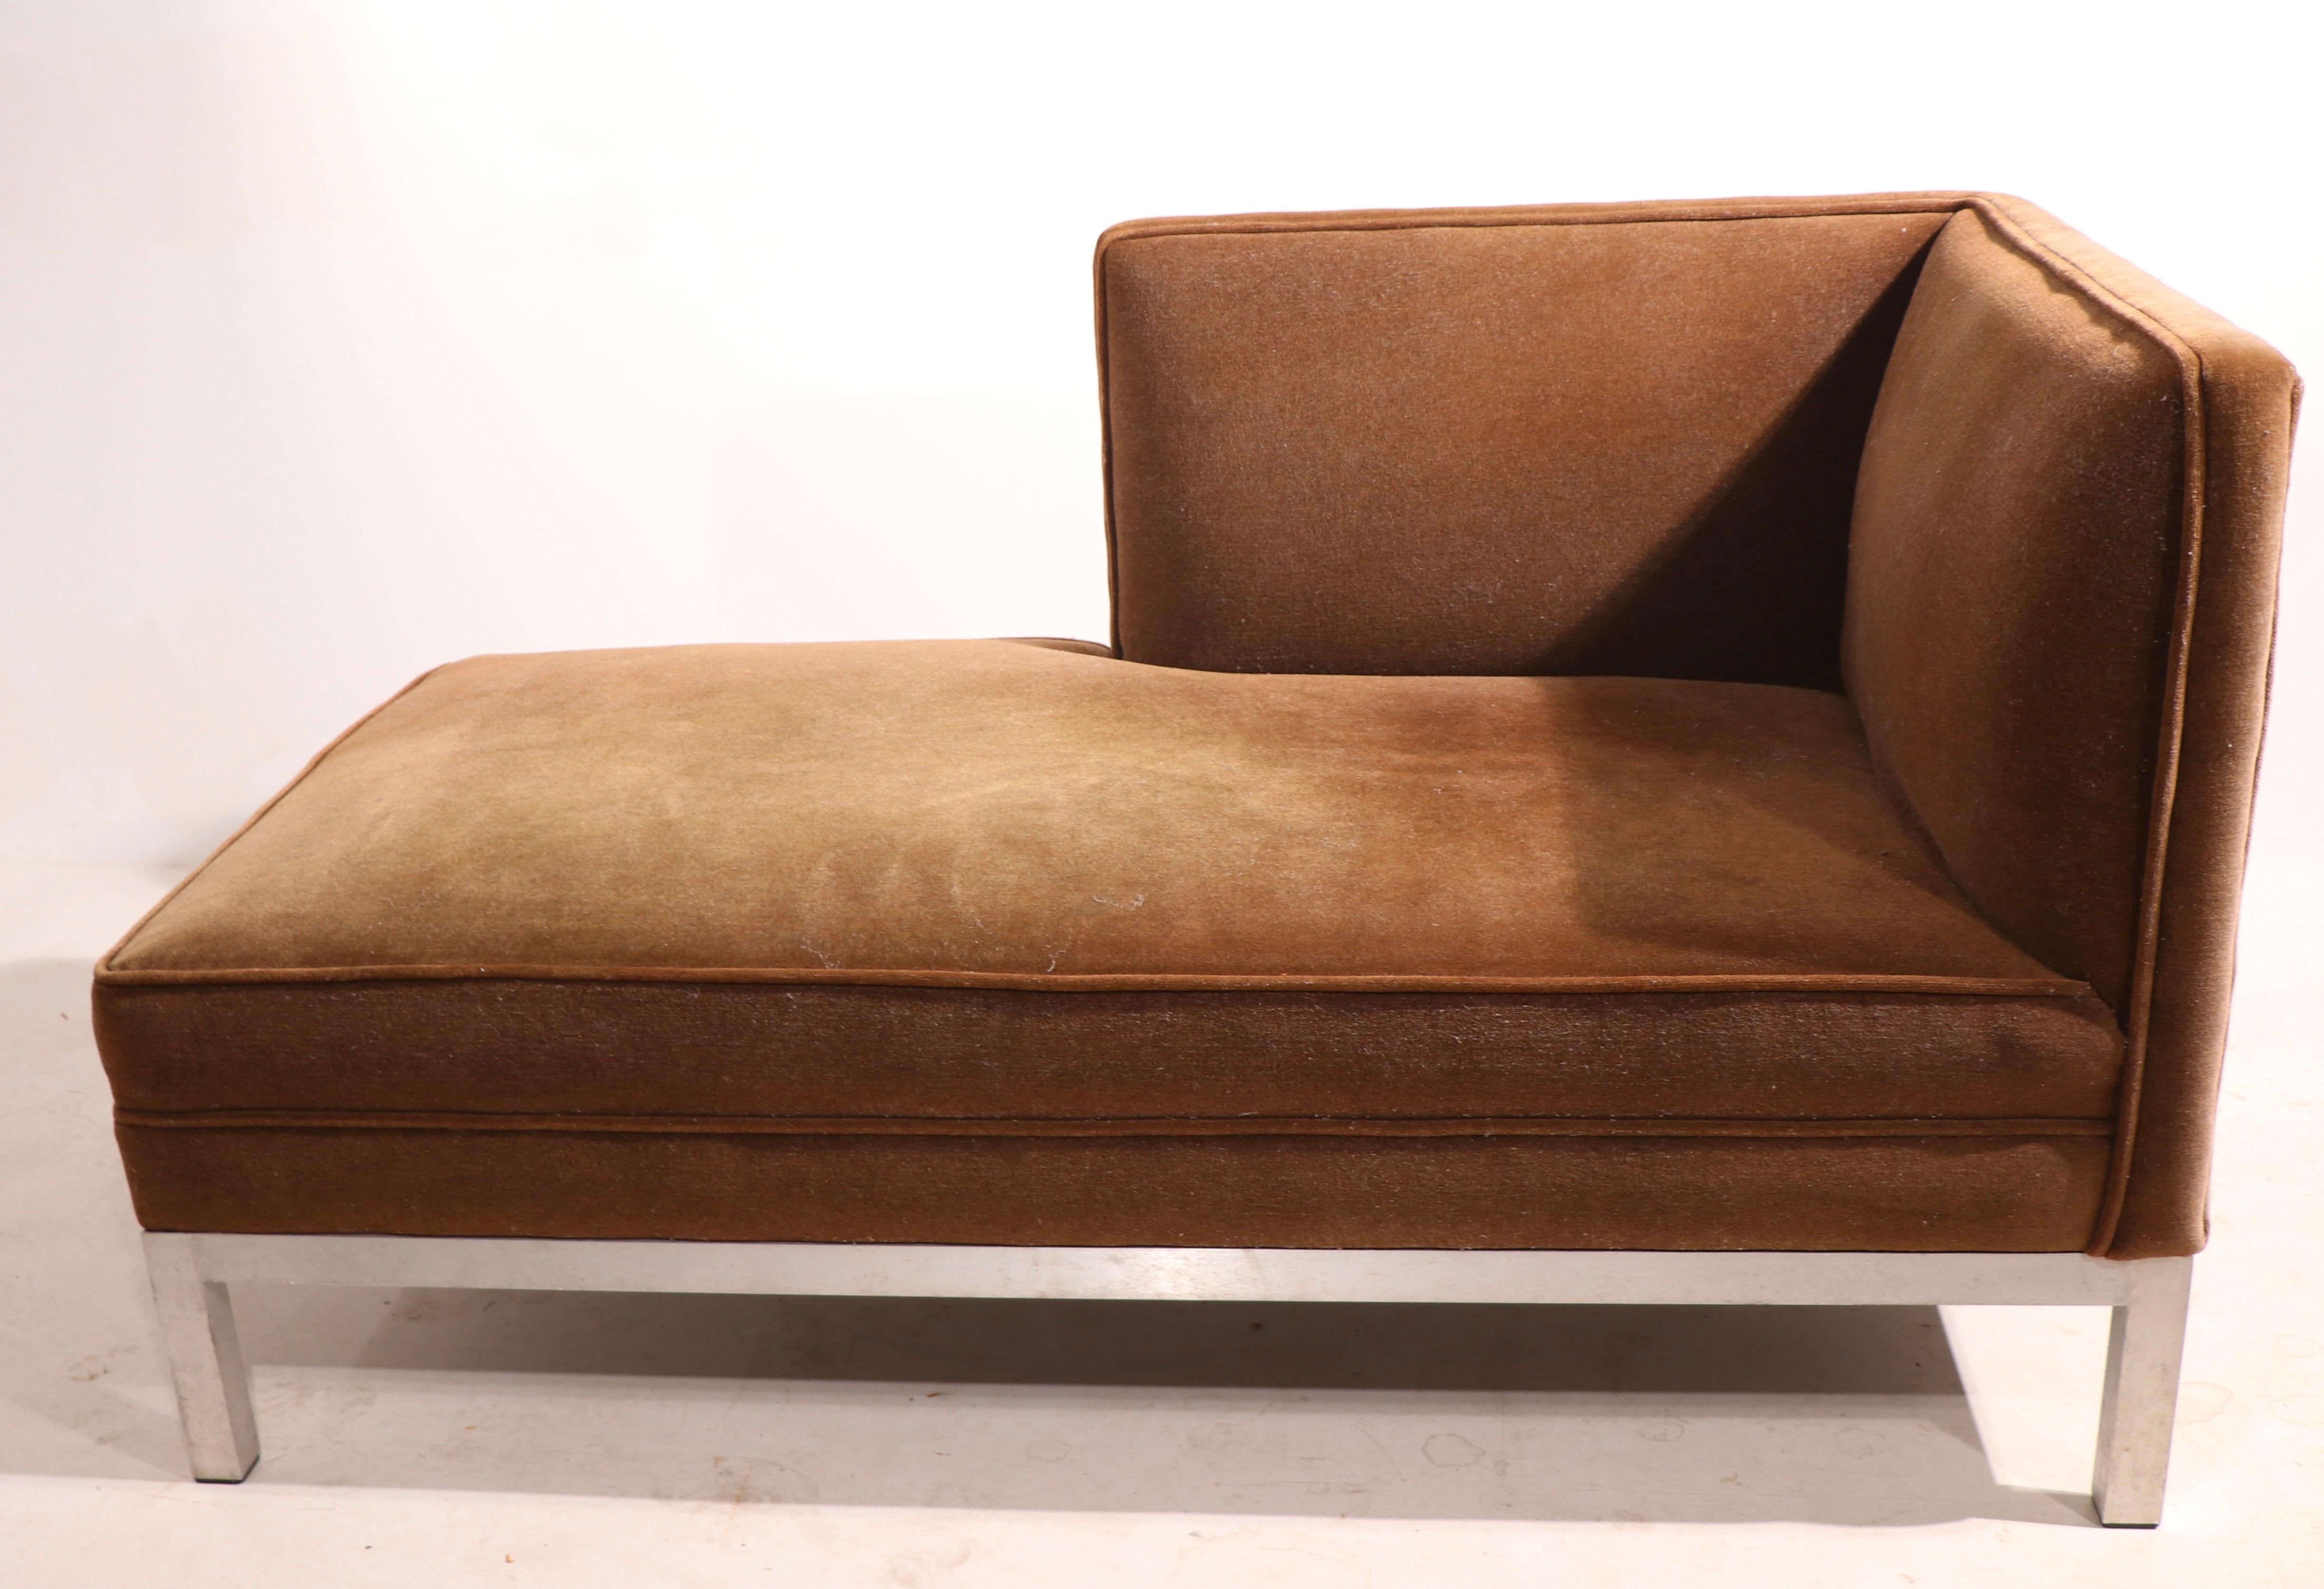 American Brown Jordan Charter Furniture Oslo Chaise 1 Available